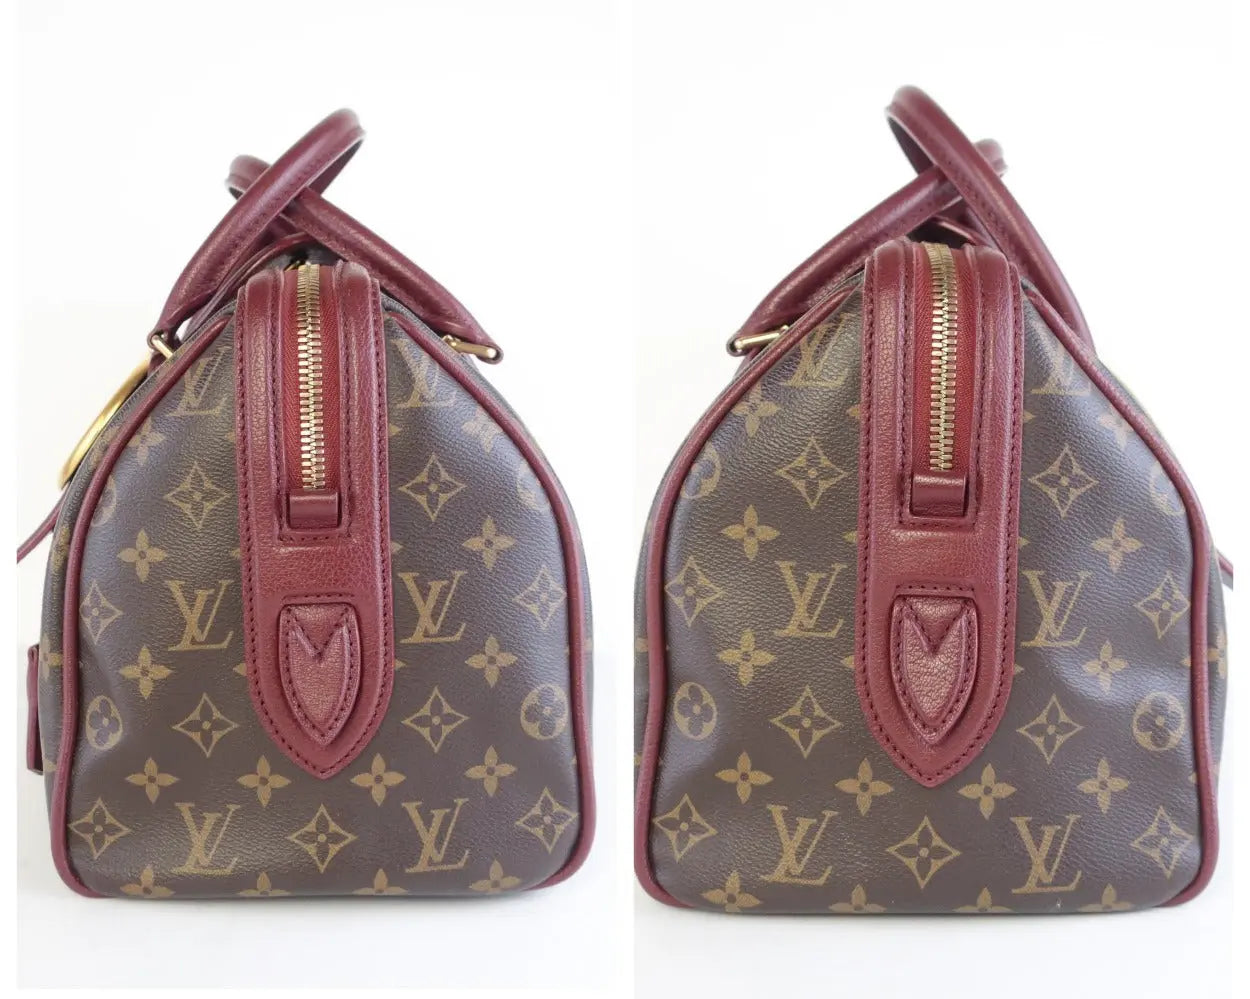 Louis Vuitton 2012 pre-owned limited edition Golden Arrow Speedy bag